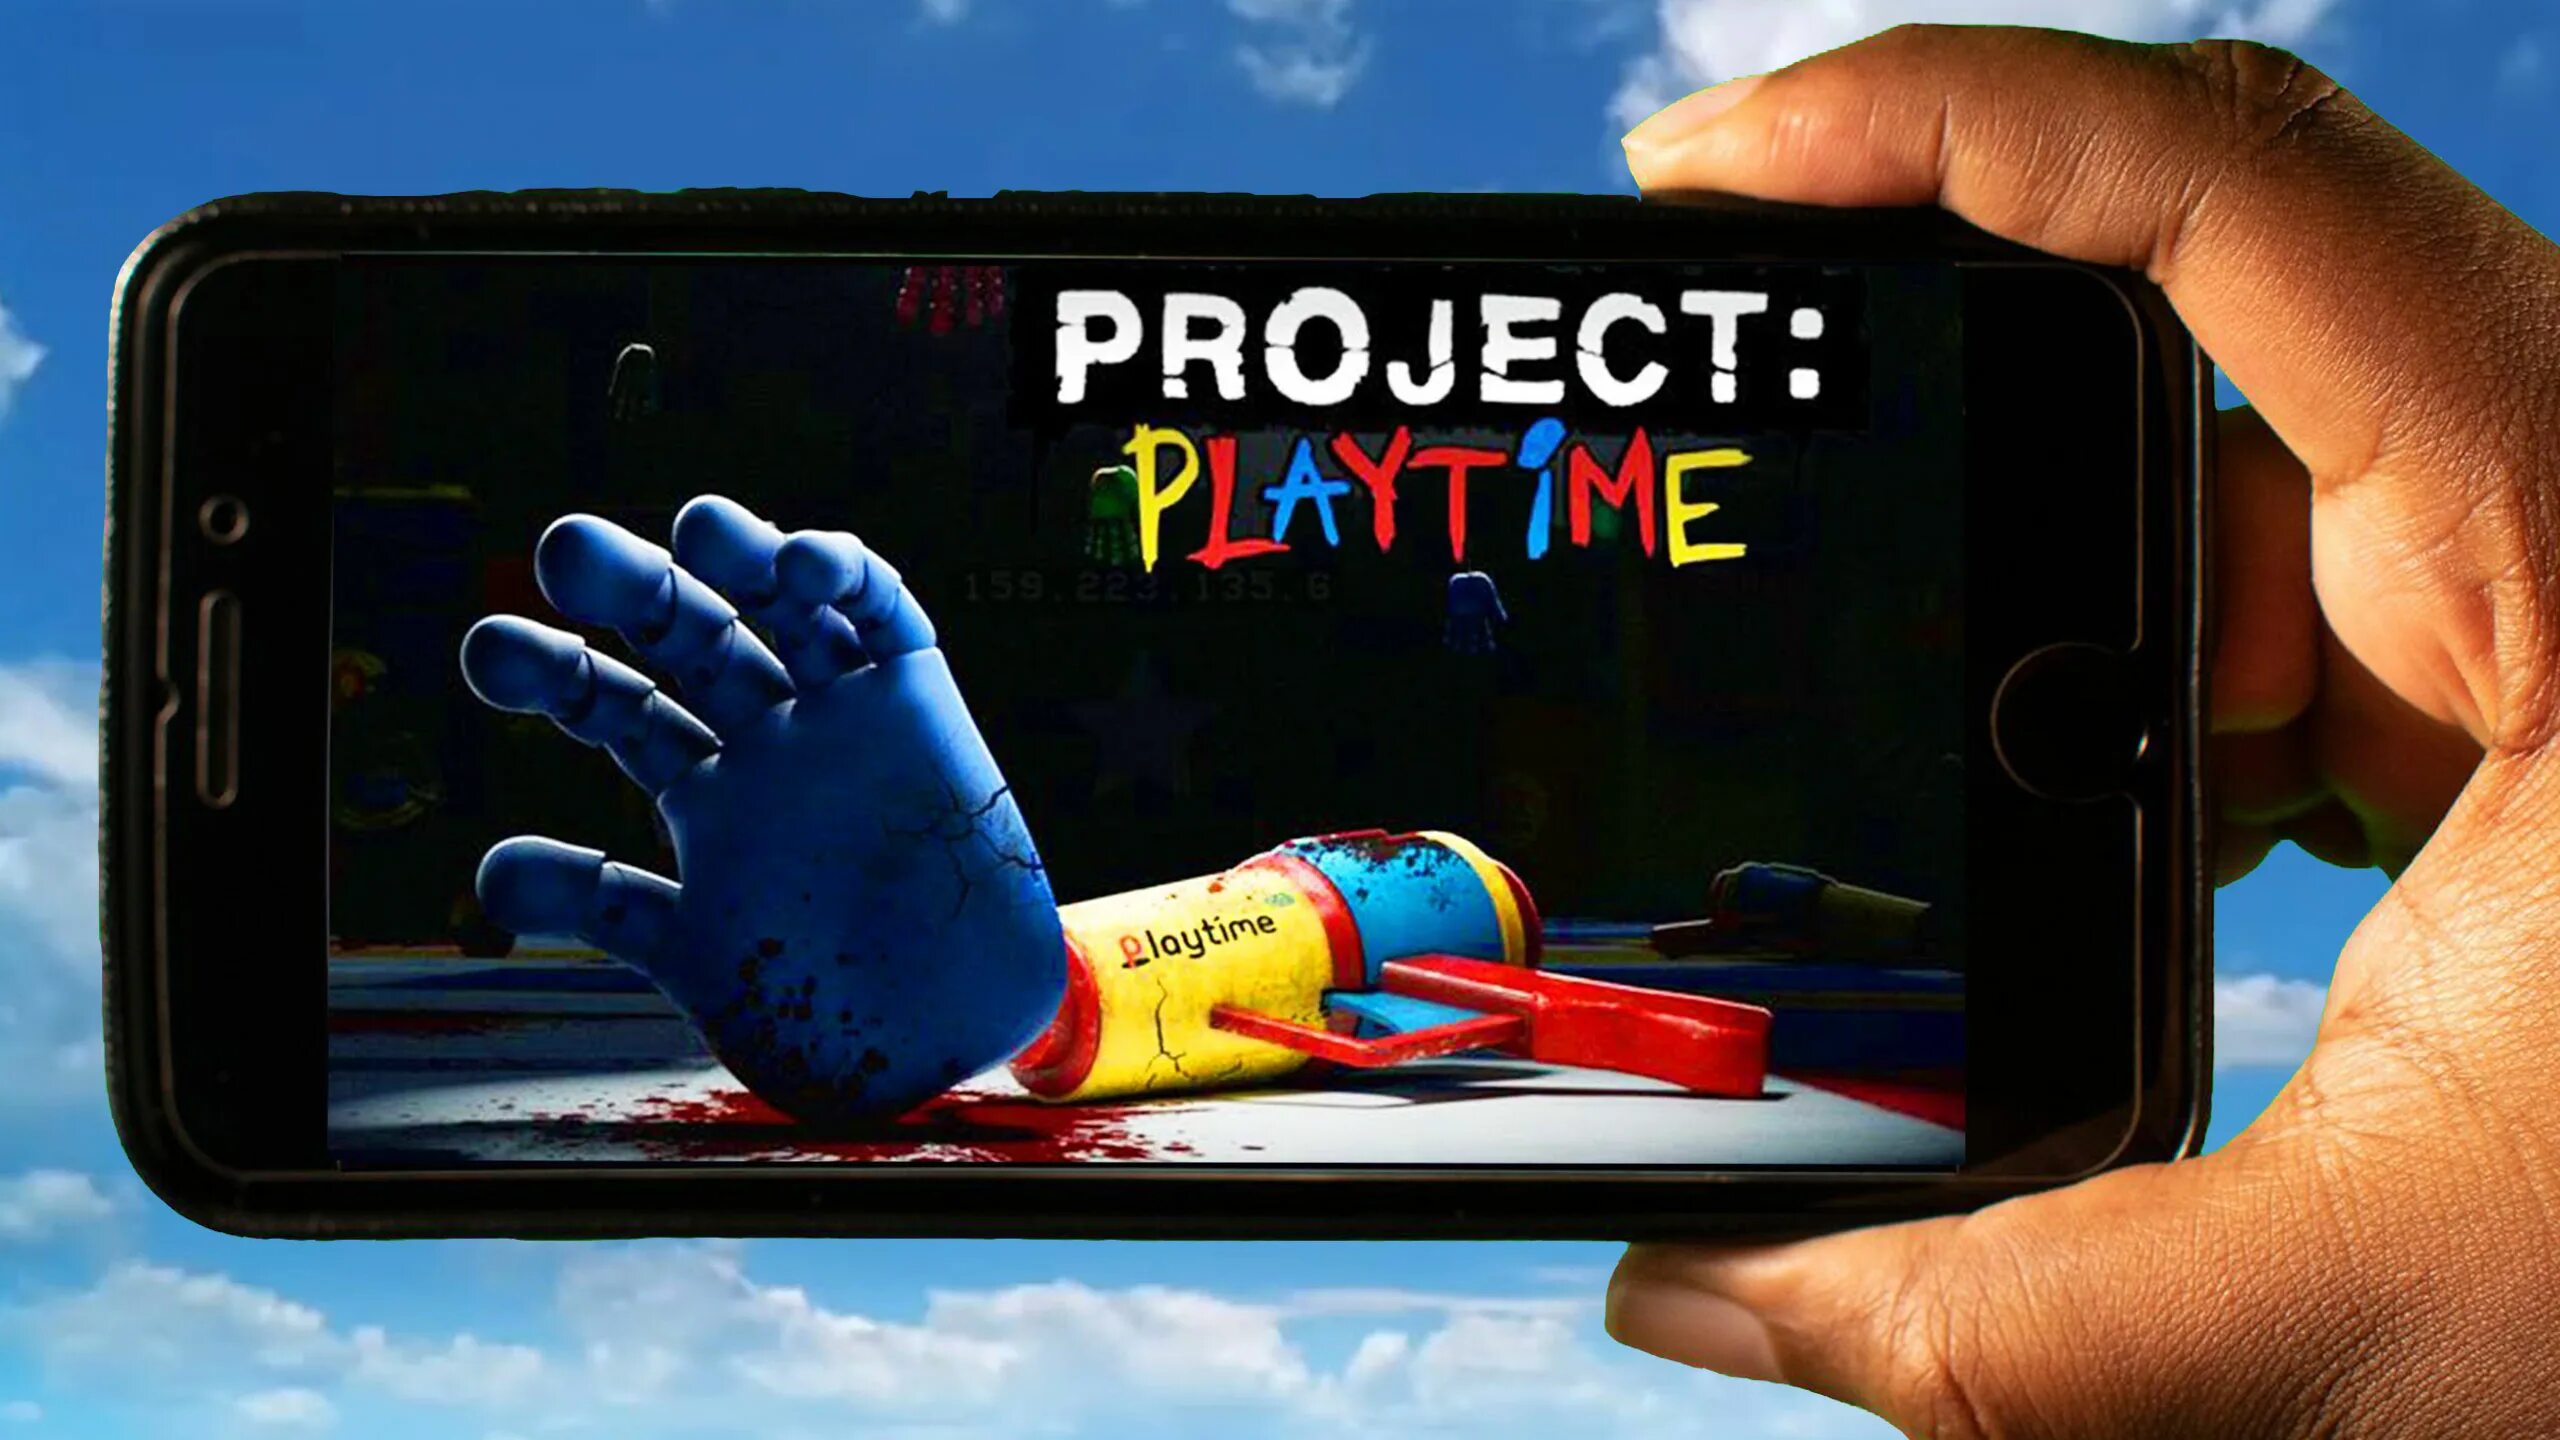 Project Playtime. Проджек плэитаим. Project Playtime тикеты. Проект Play time mobile.